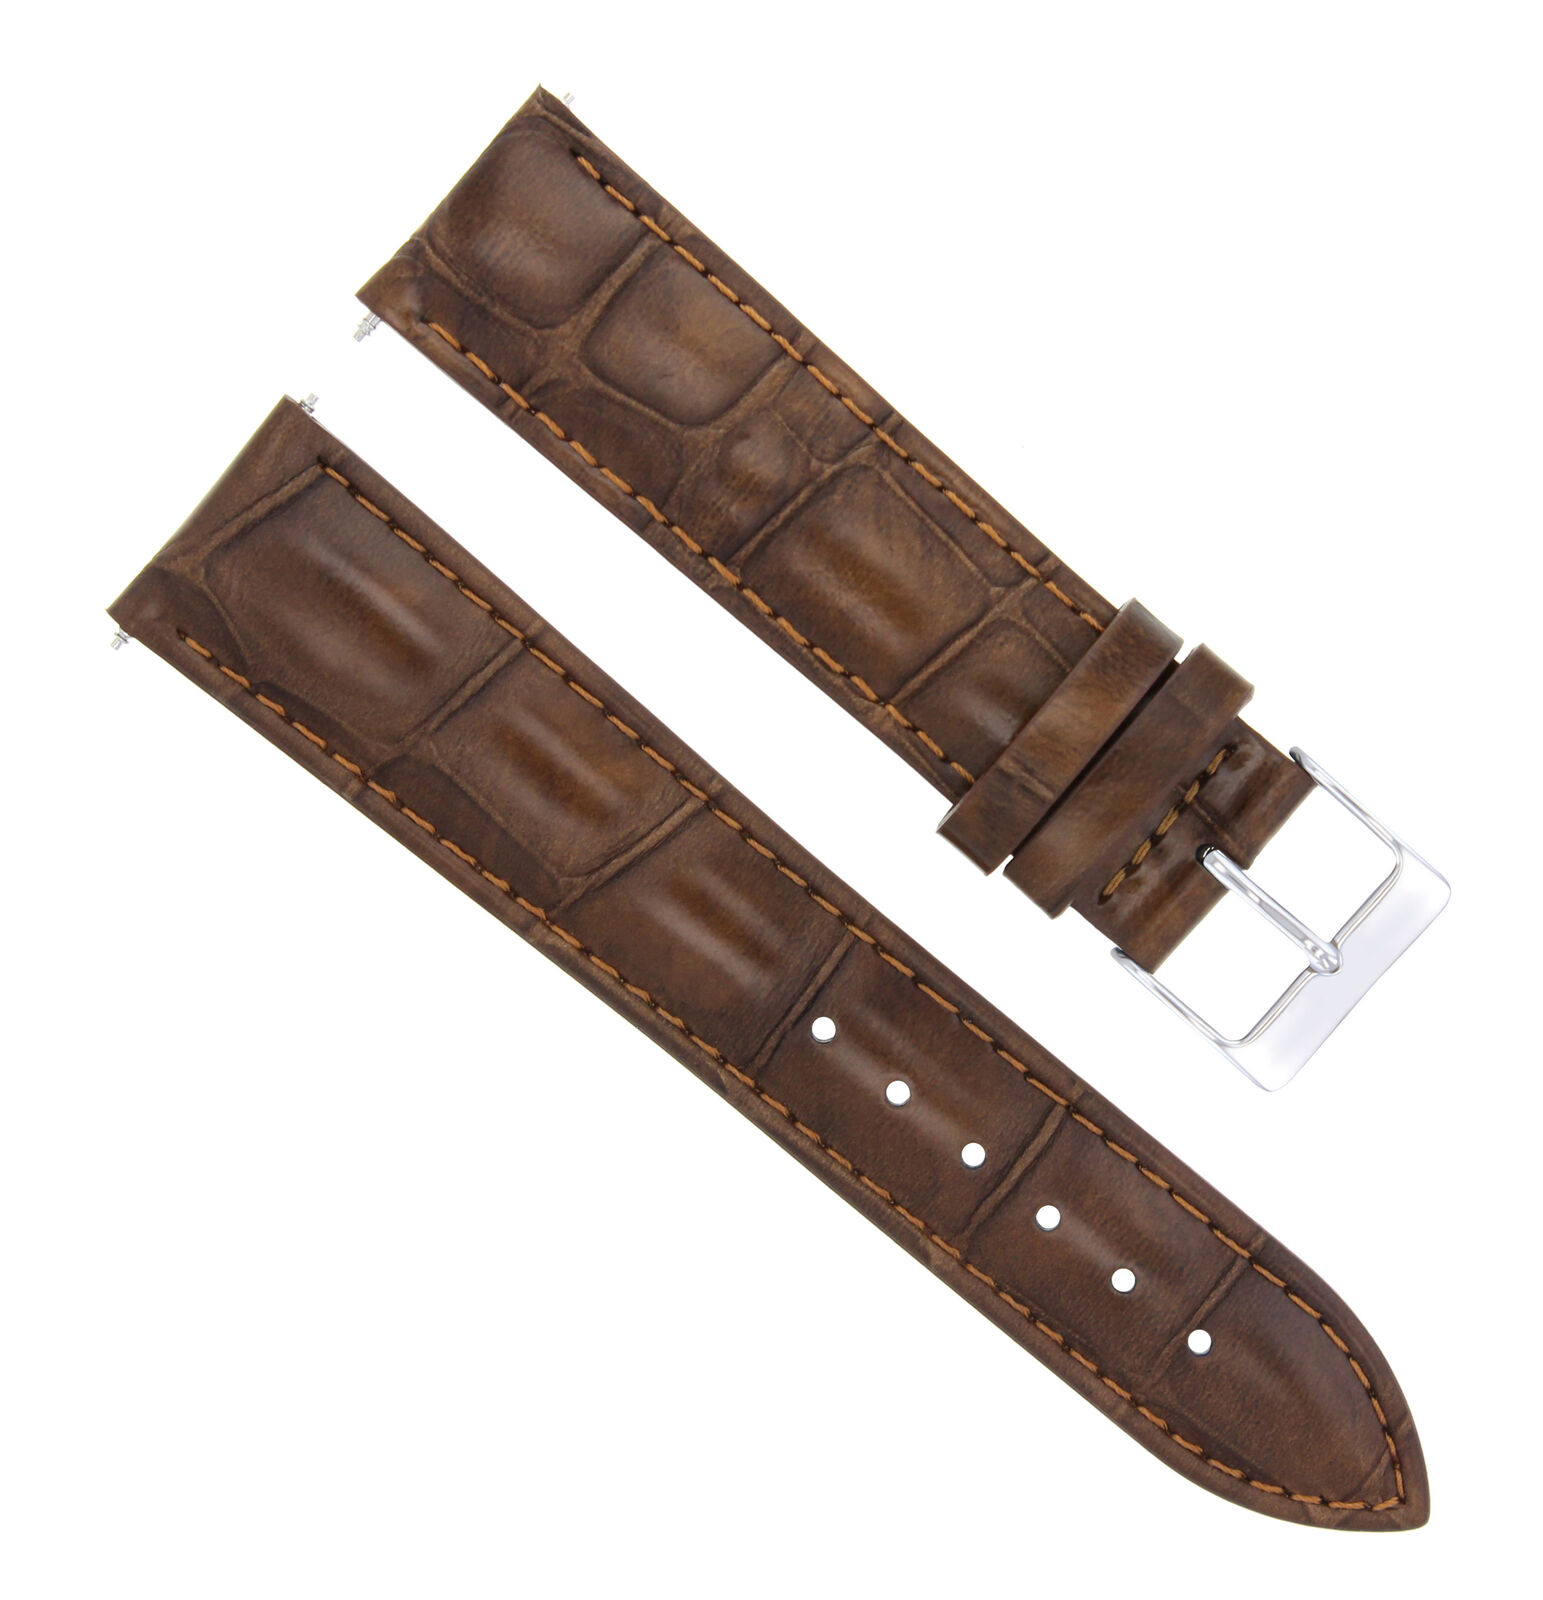 20MM GENUINE LEATHER WATCH STRAP BAND FOR BULOVA ACCUTRON WATCH LIGHT BROWN